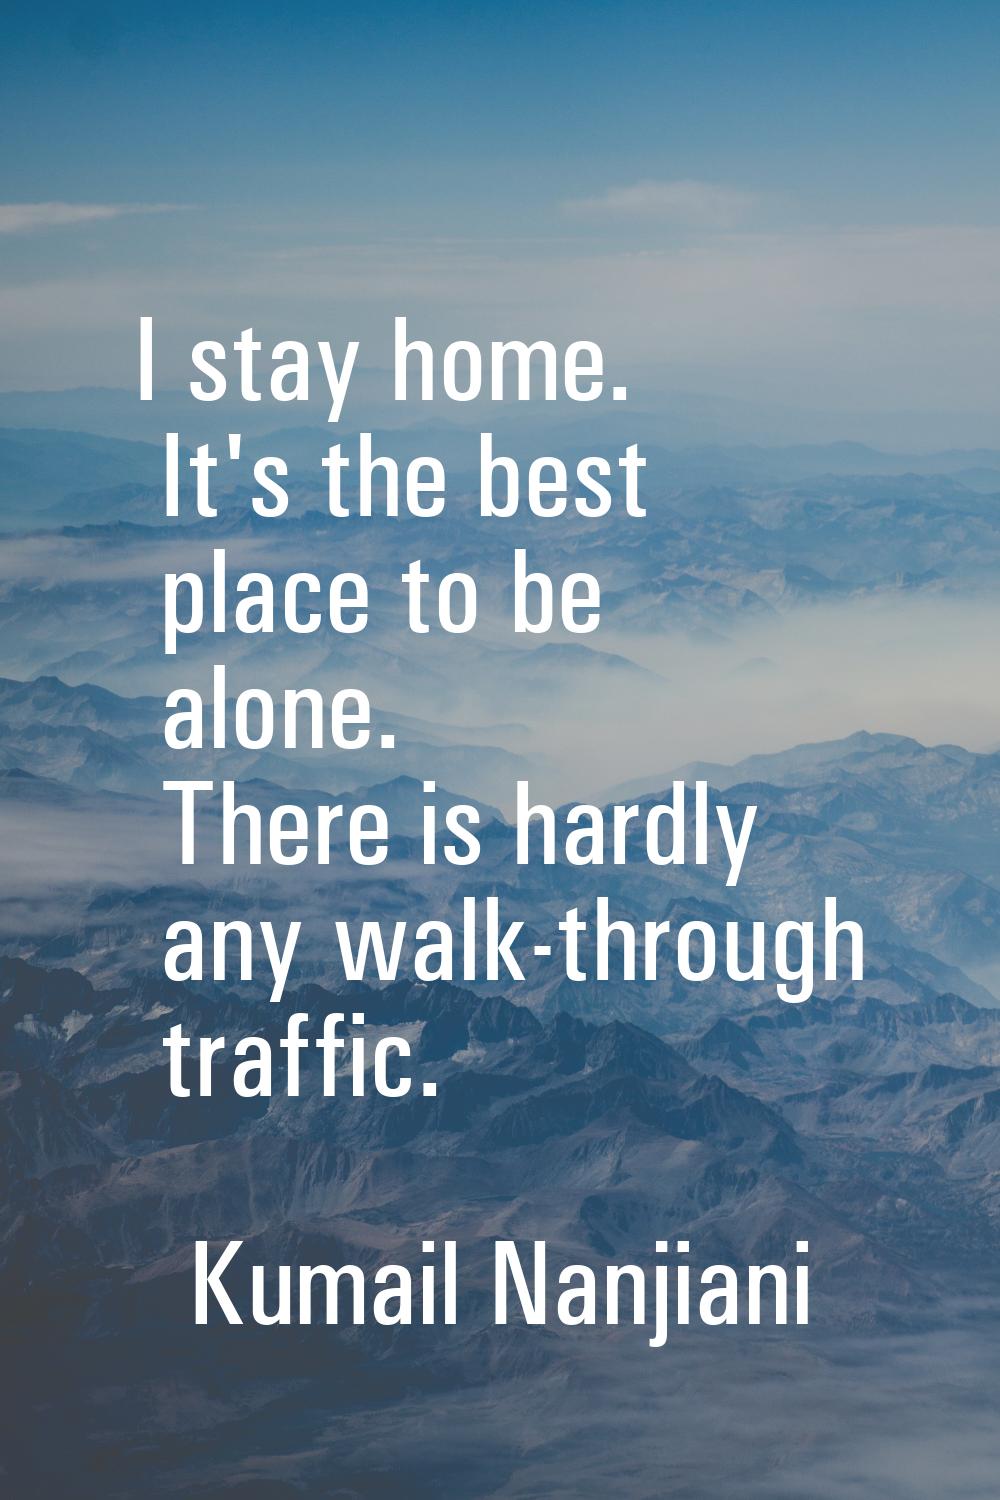 I stay home. It's the best place to be alone. There is hardly any walk-through traffic.